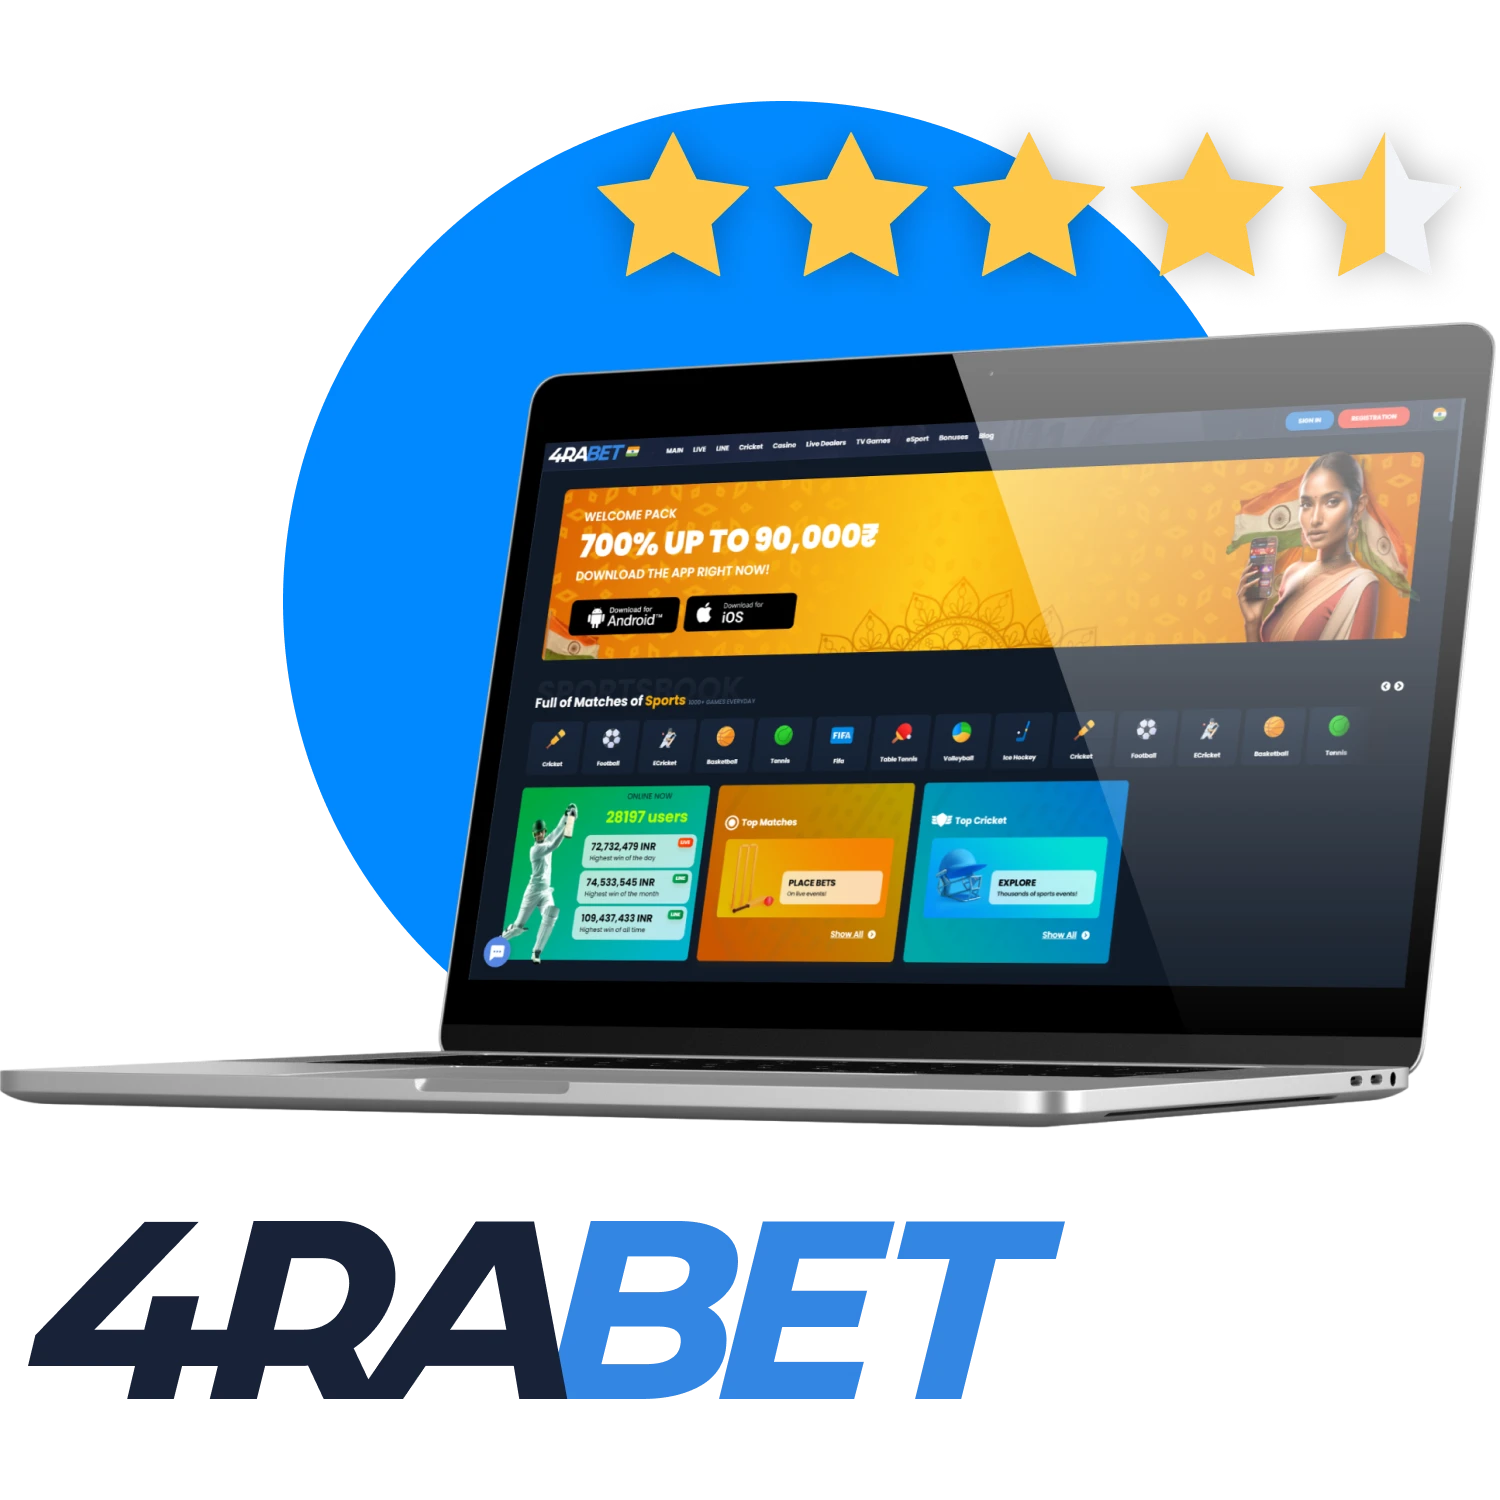 Learn what users think about the 4rabet betting and gambling website.